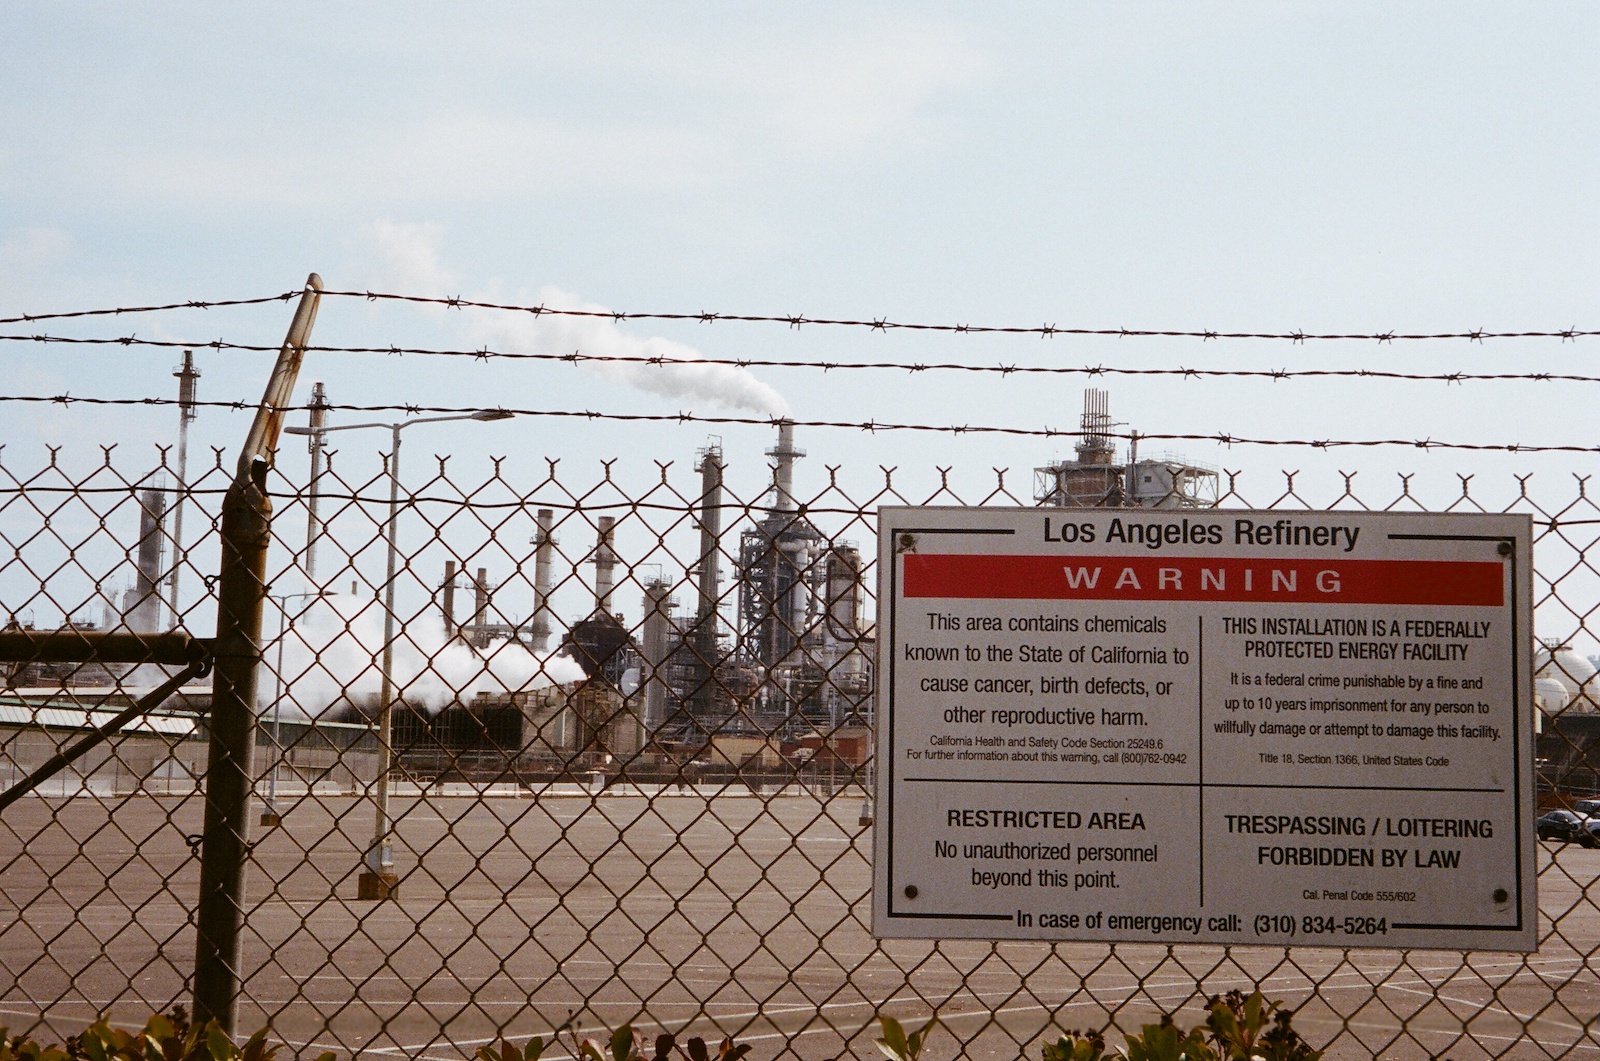 A plume of smoke and air pollution causing chemicals rises from the Los Angeles Refinery.